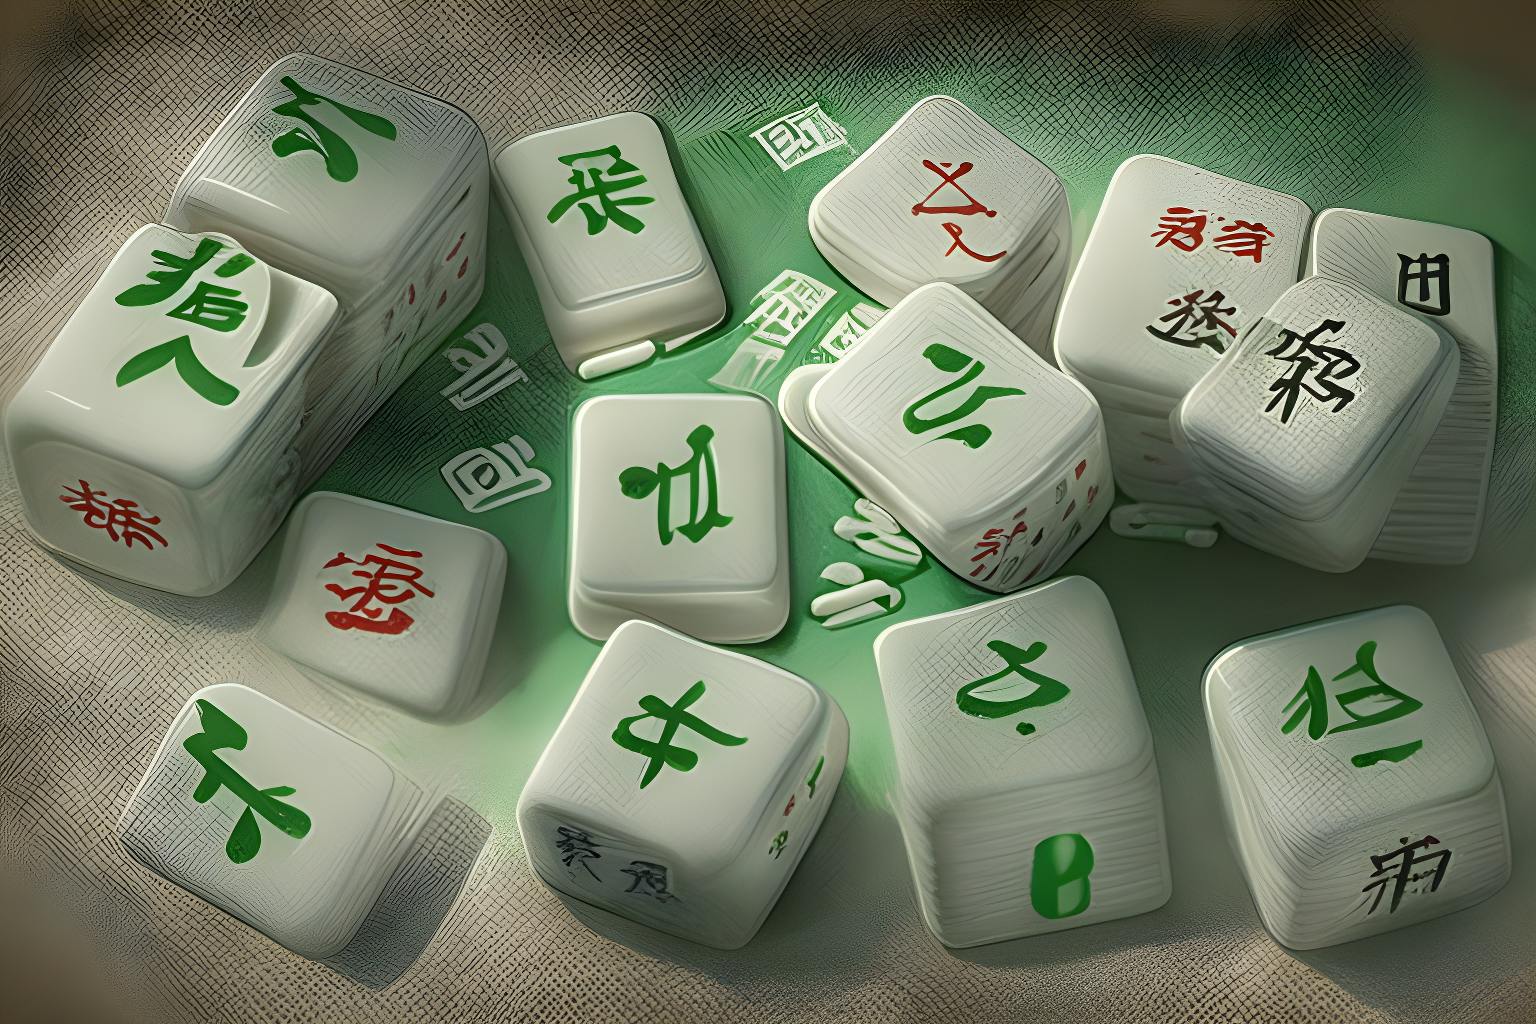 /0xmahjong-nft-to-begin-free-minting-mahjong-meta-game-expects-over-$10-million-in-funding feature image